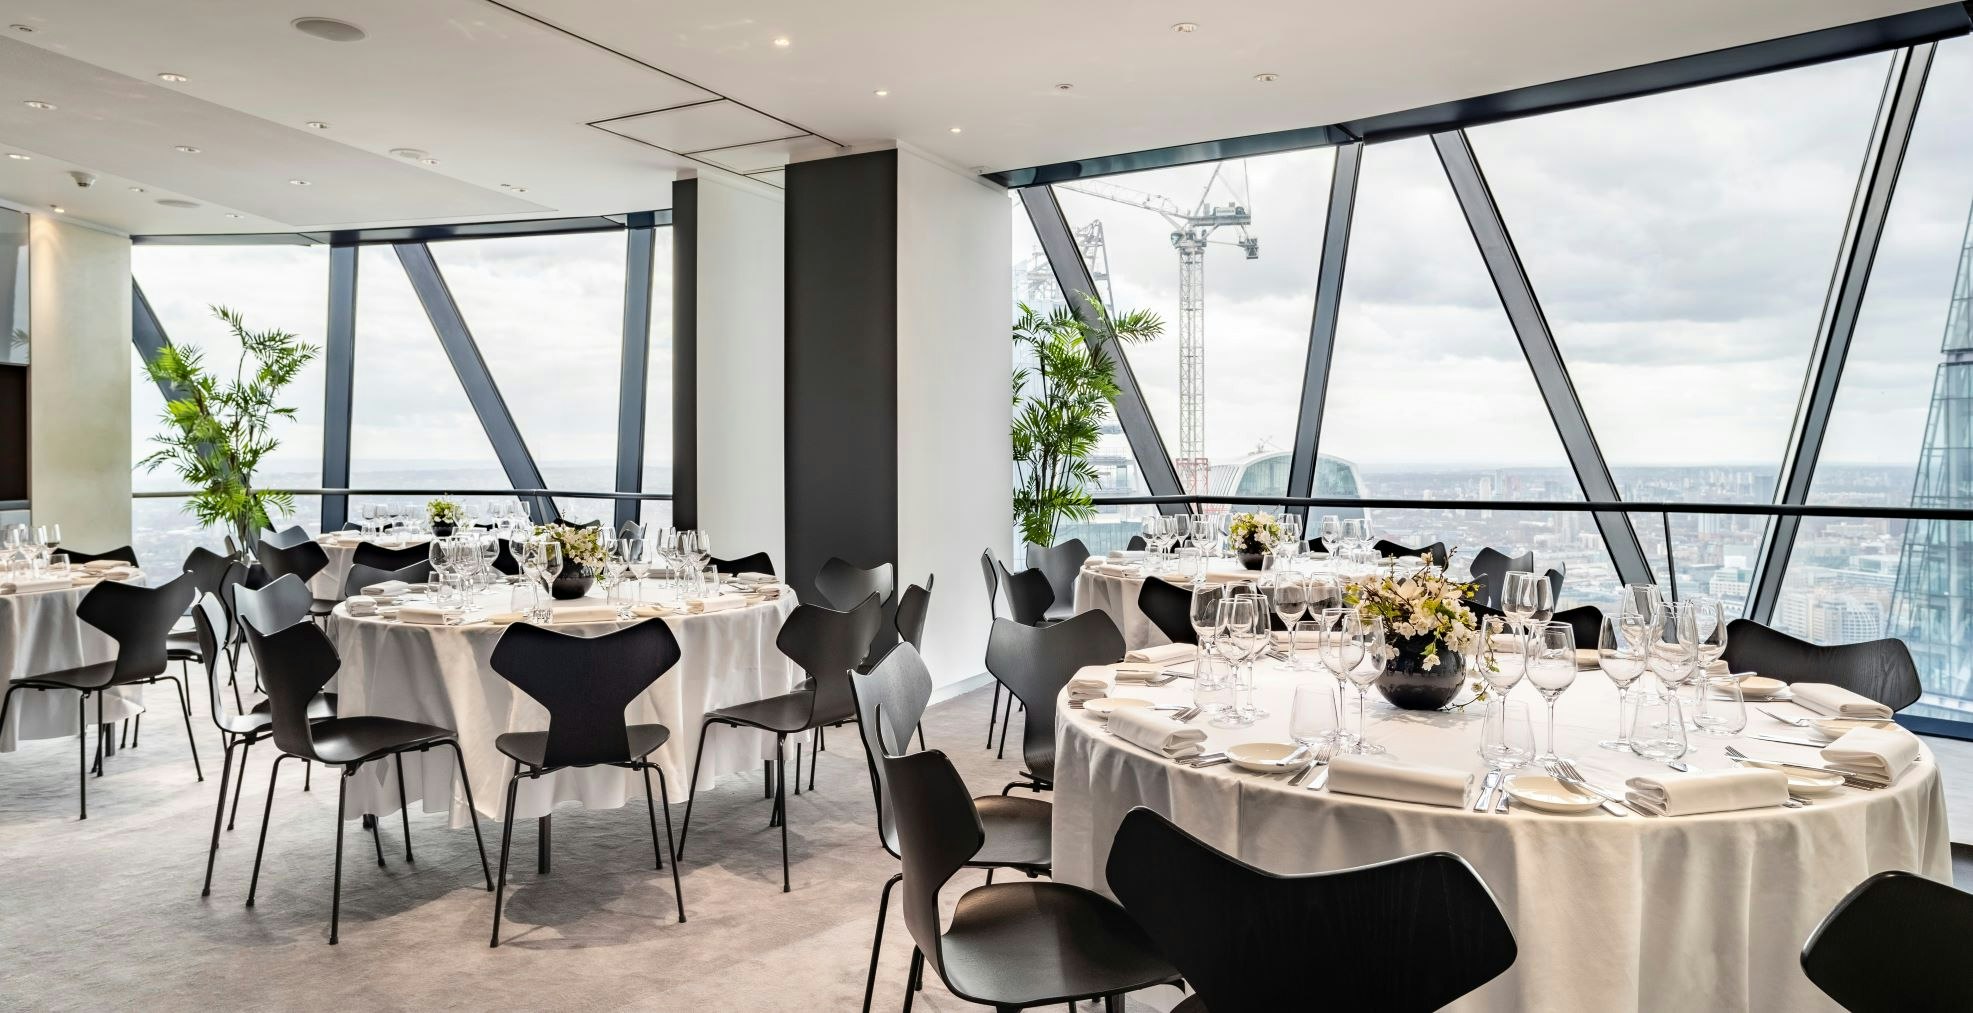 60th Birthday Venues - Searcys at the Gherkin